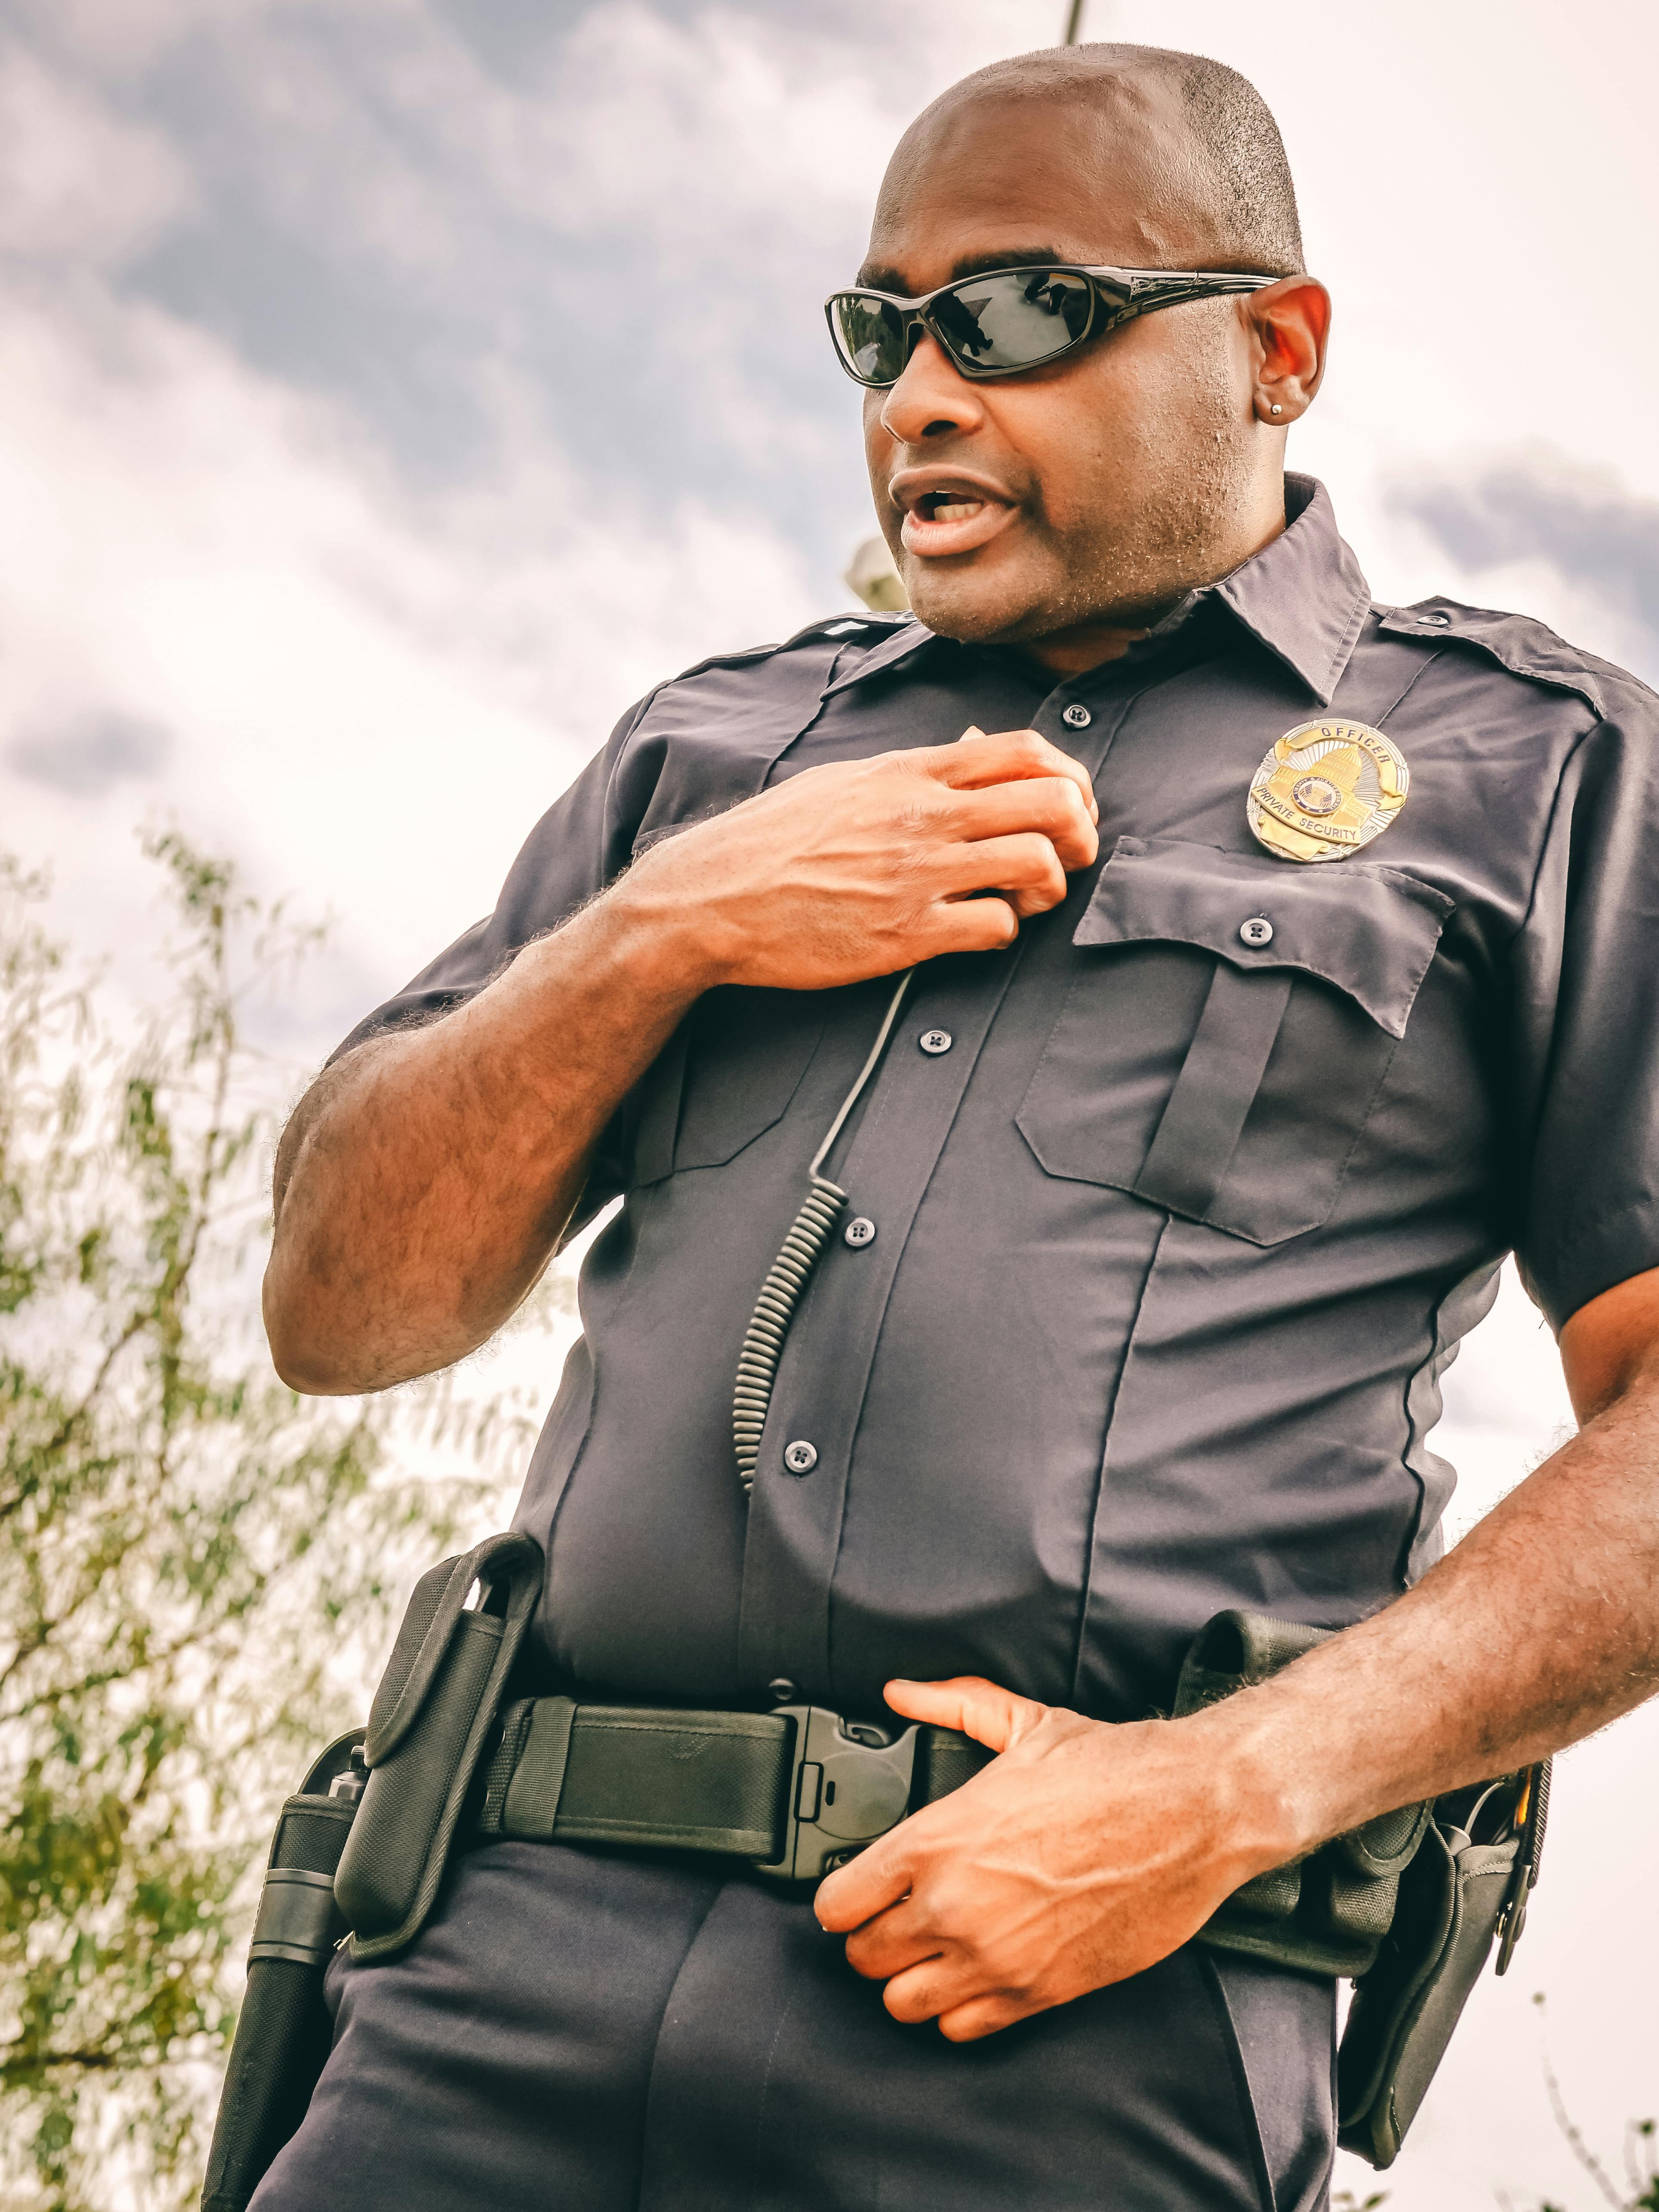 A police officer talking into his walkie-talkie | Source: Pexels